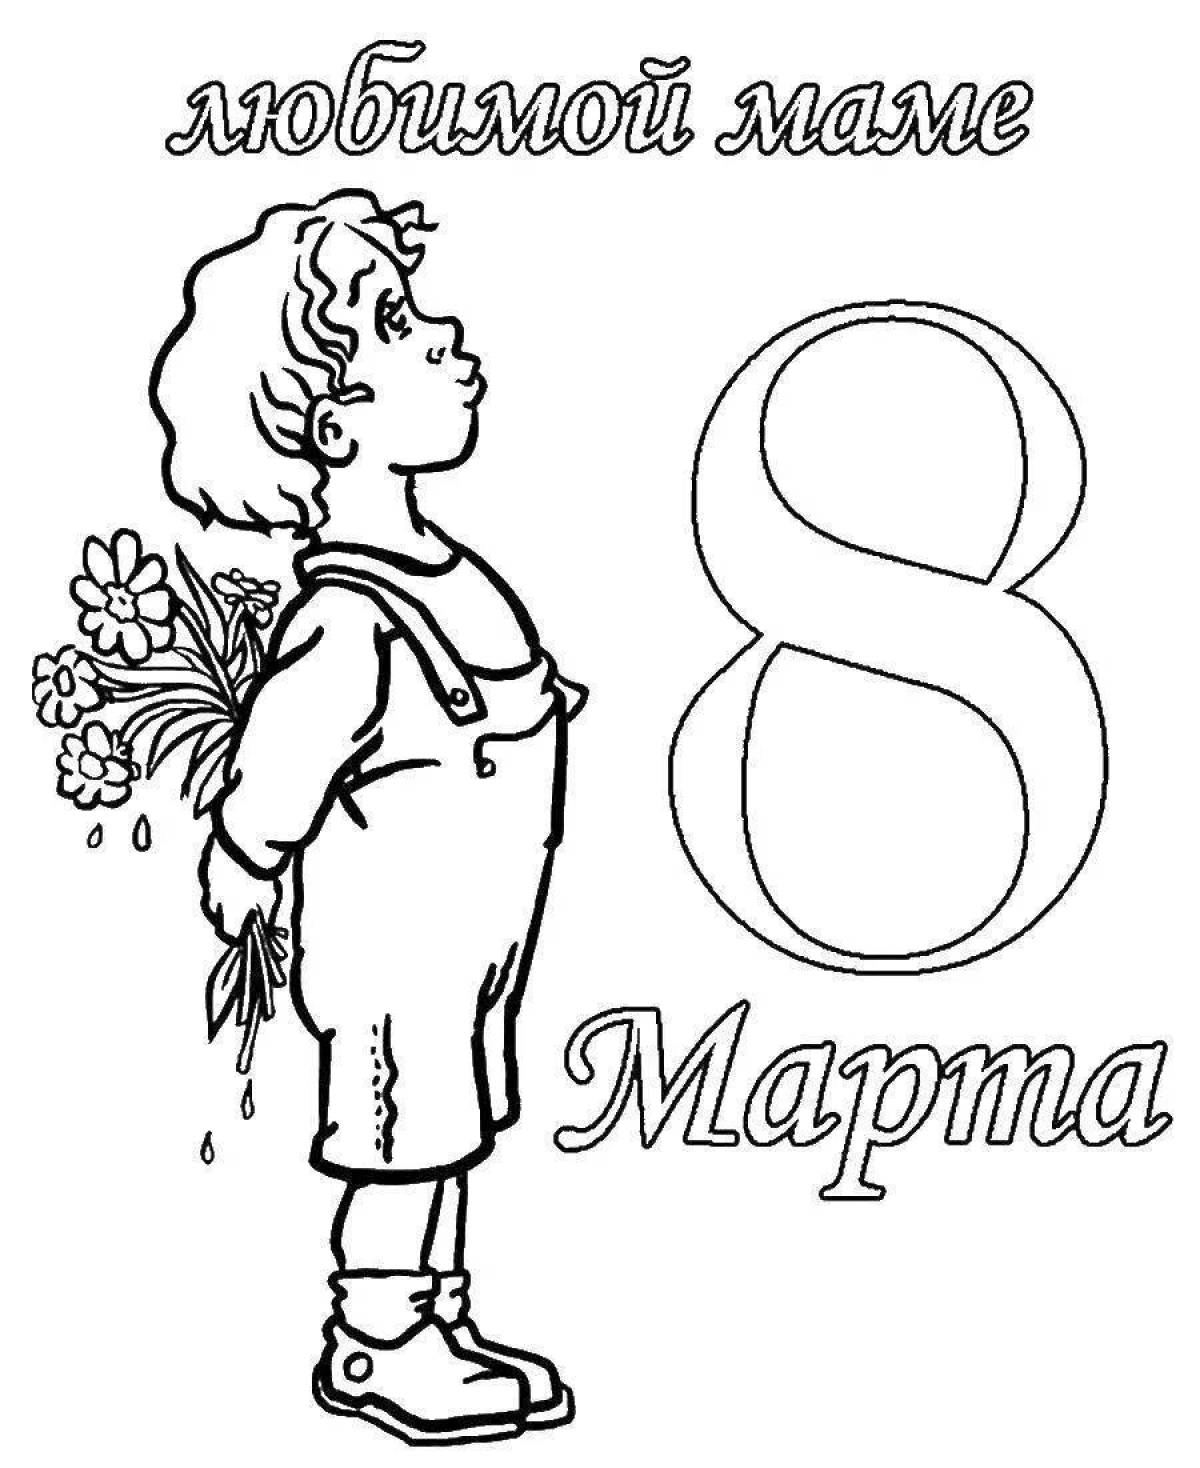 Martha's exciting coloring page